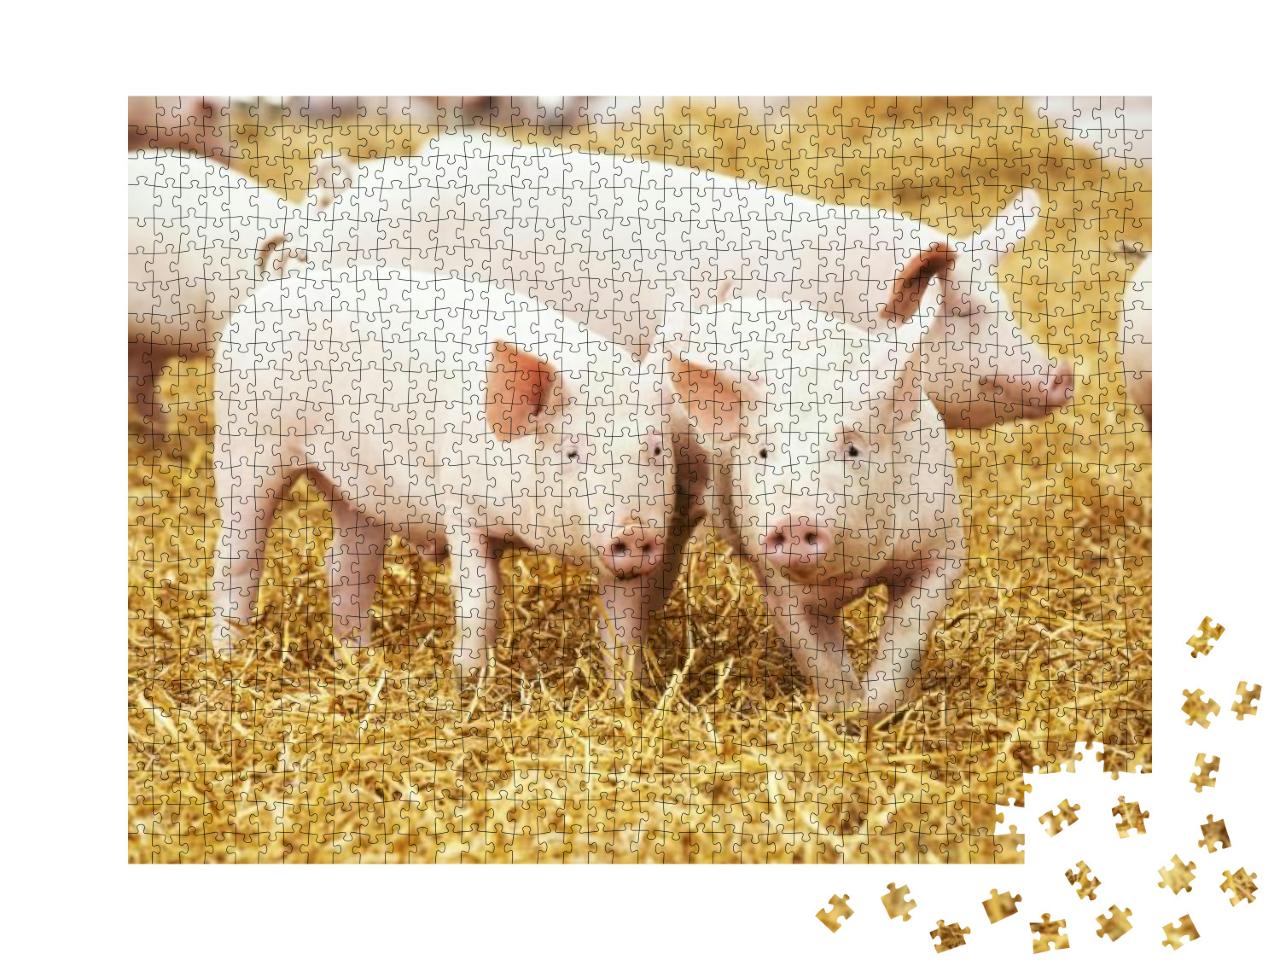 Two Young Piglet on Hay & Straw At Pig Breeding Farm... Jigsaw Puzzle with 1000 pieces